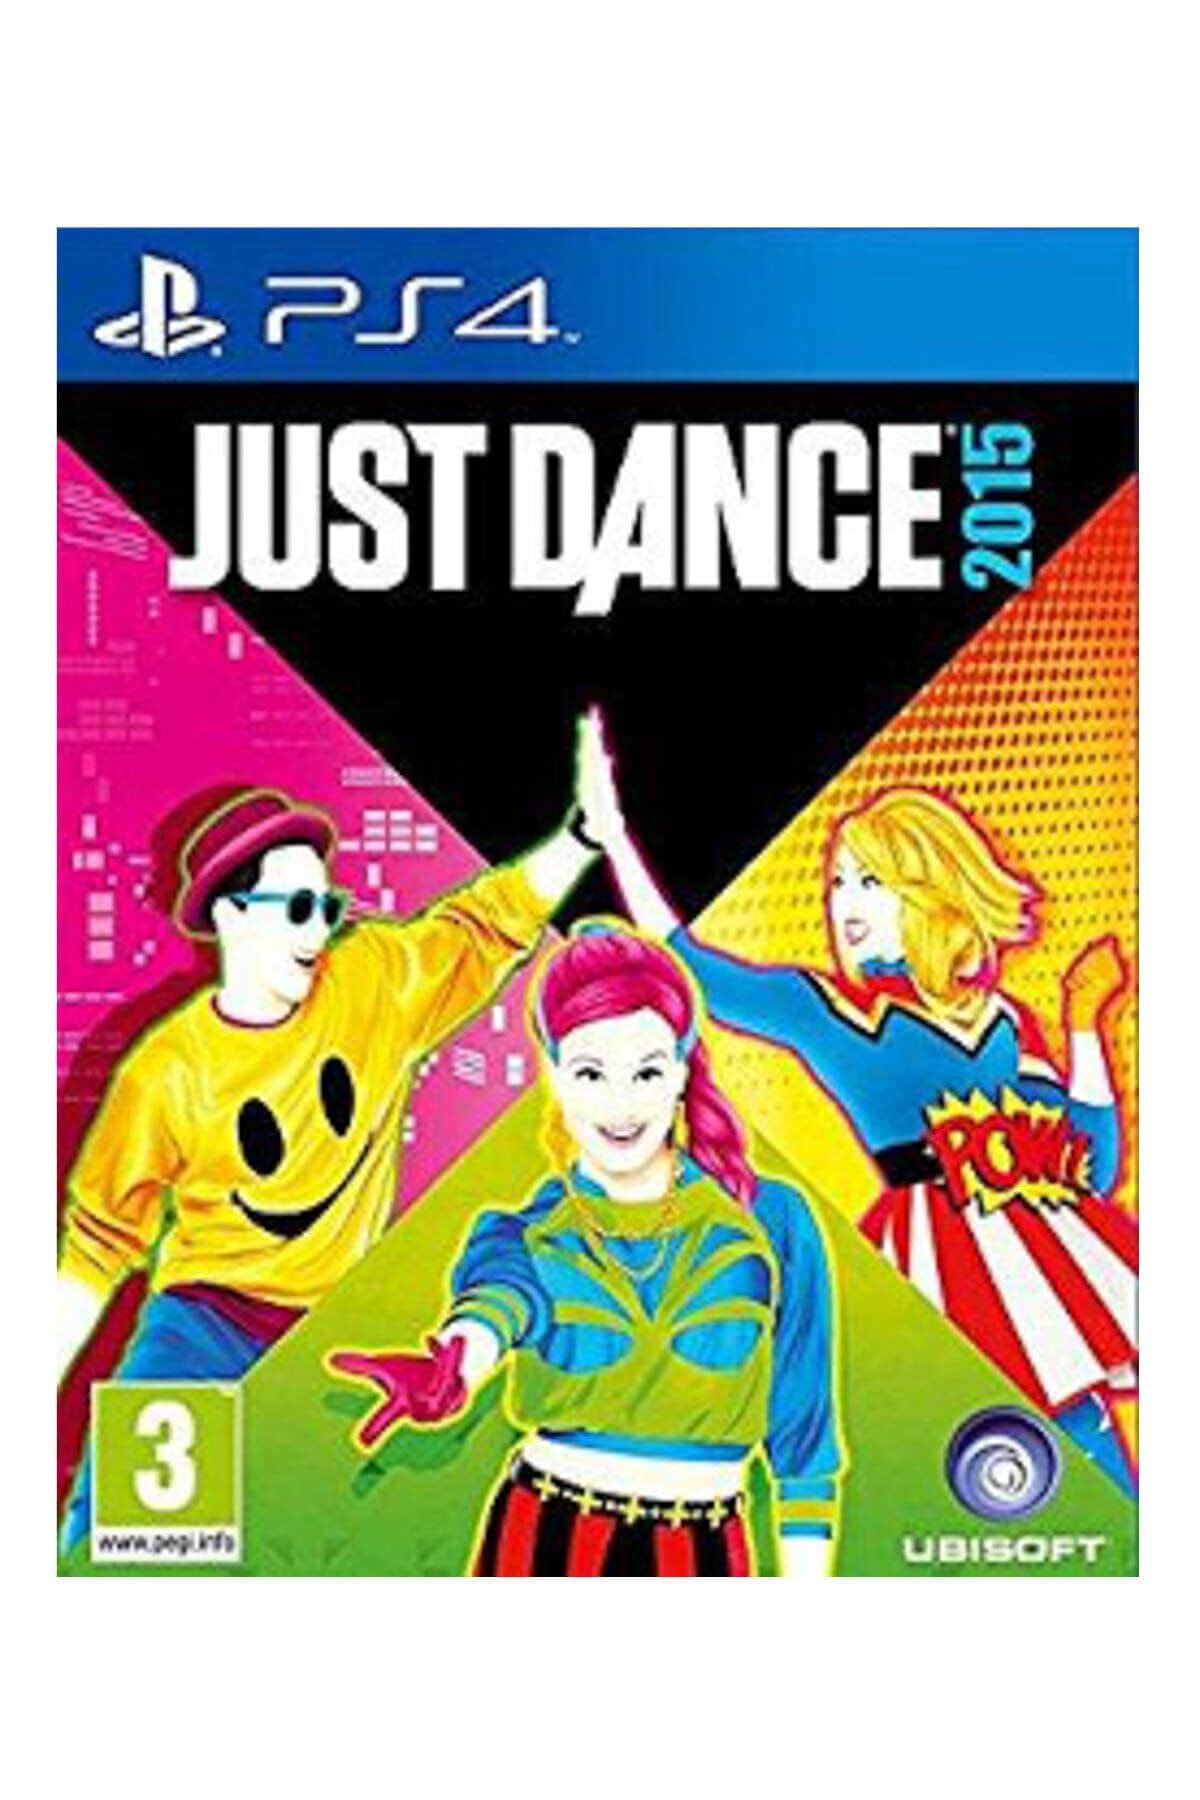 Игра just one. Xbox 360 just Dance 2015 Kinect. Джаст дэнс на ПС 4. Just Dance Xbox 360. Just Dance 2015 ps4.